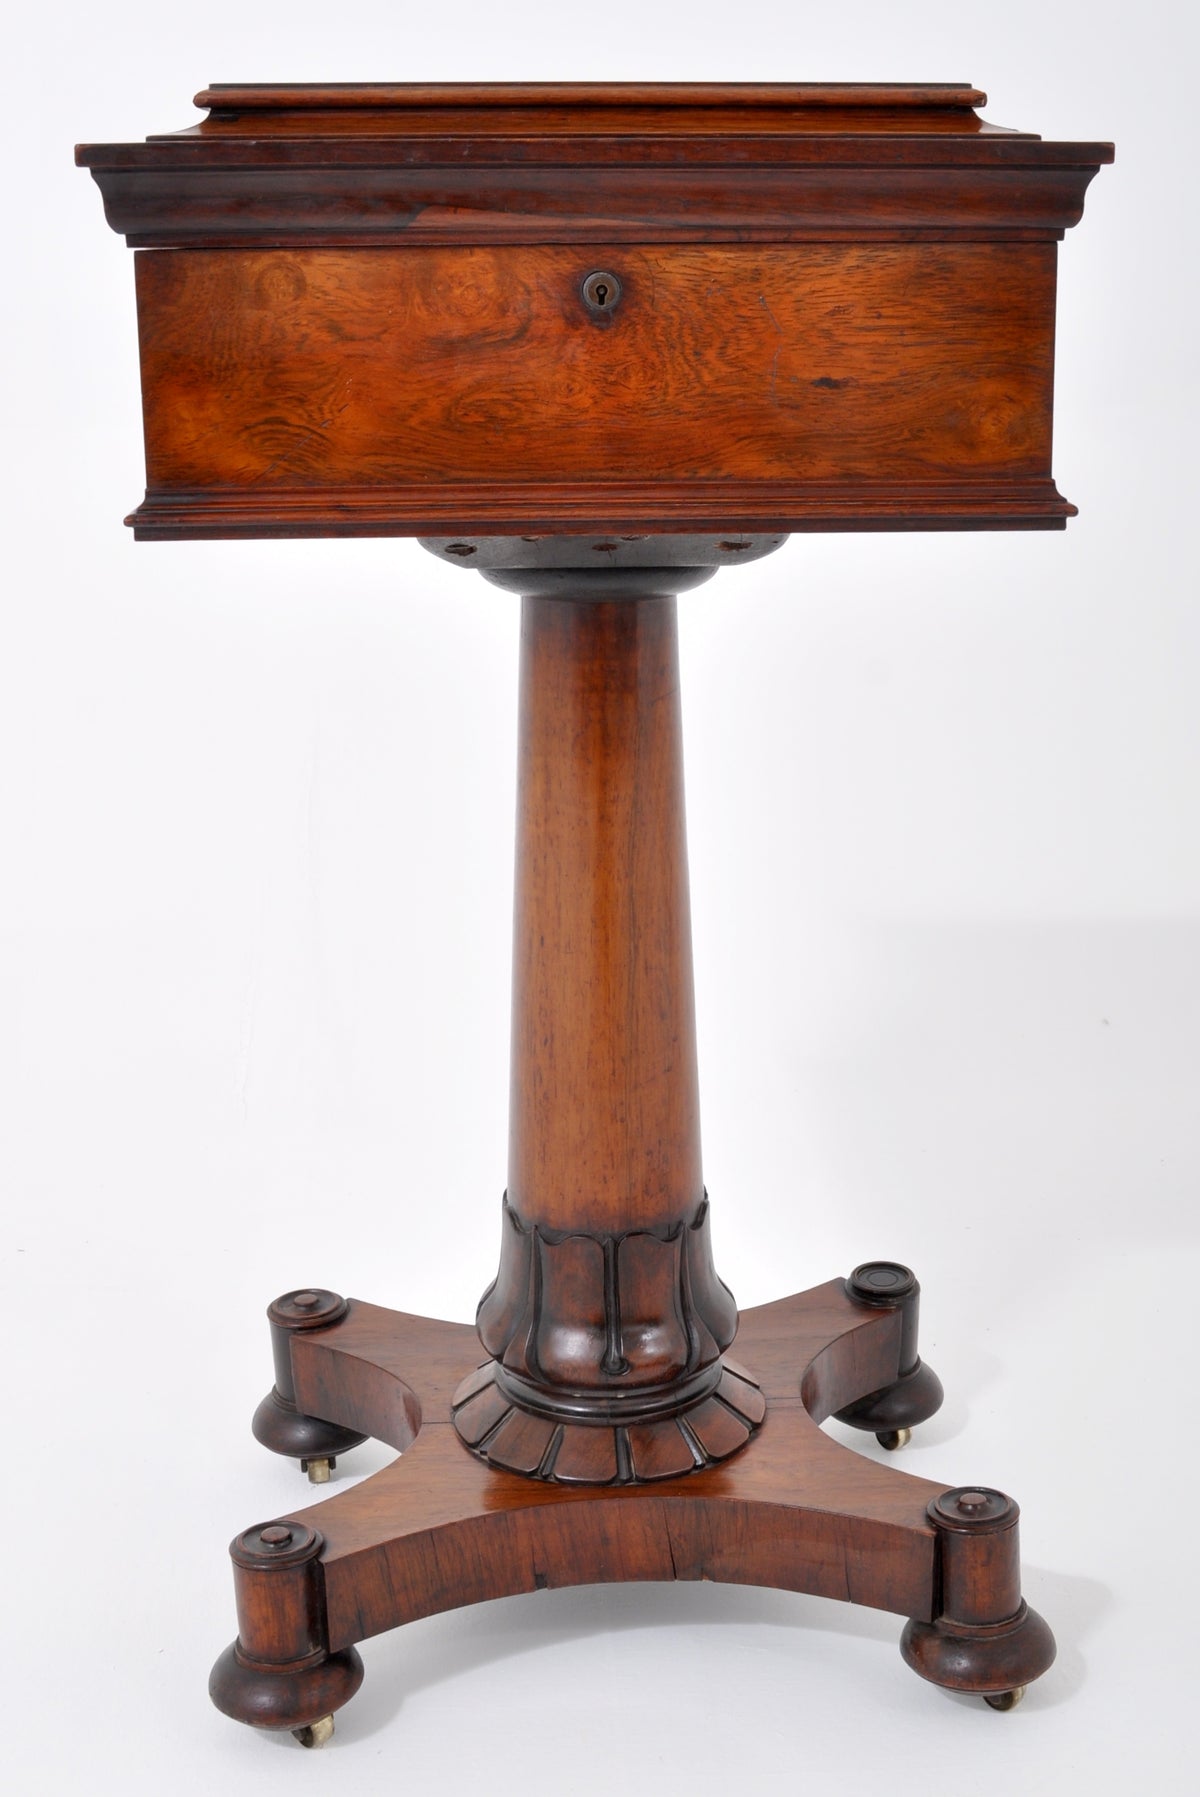 Antique English Regency Rosewood Teapoy/Table, Circa 1825